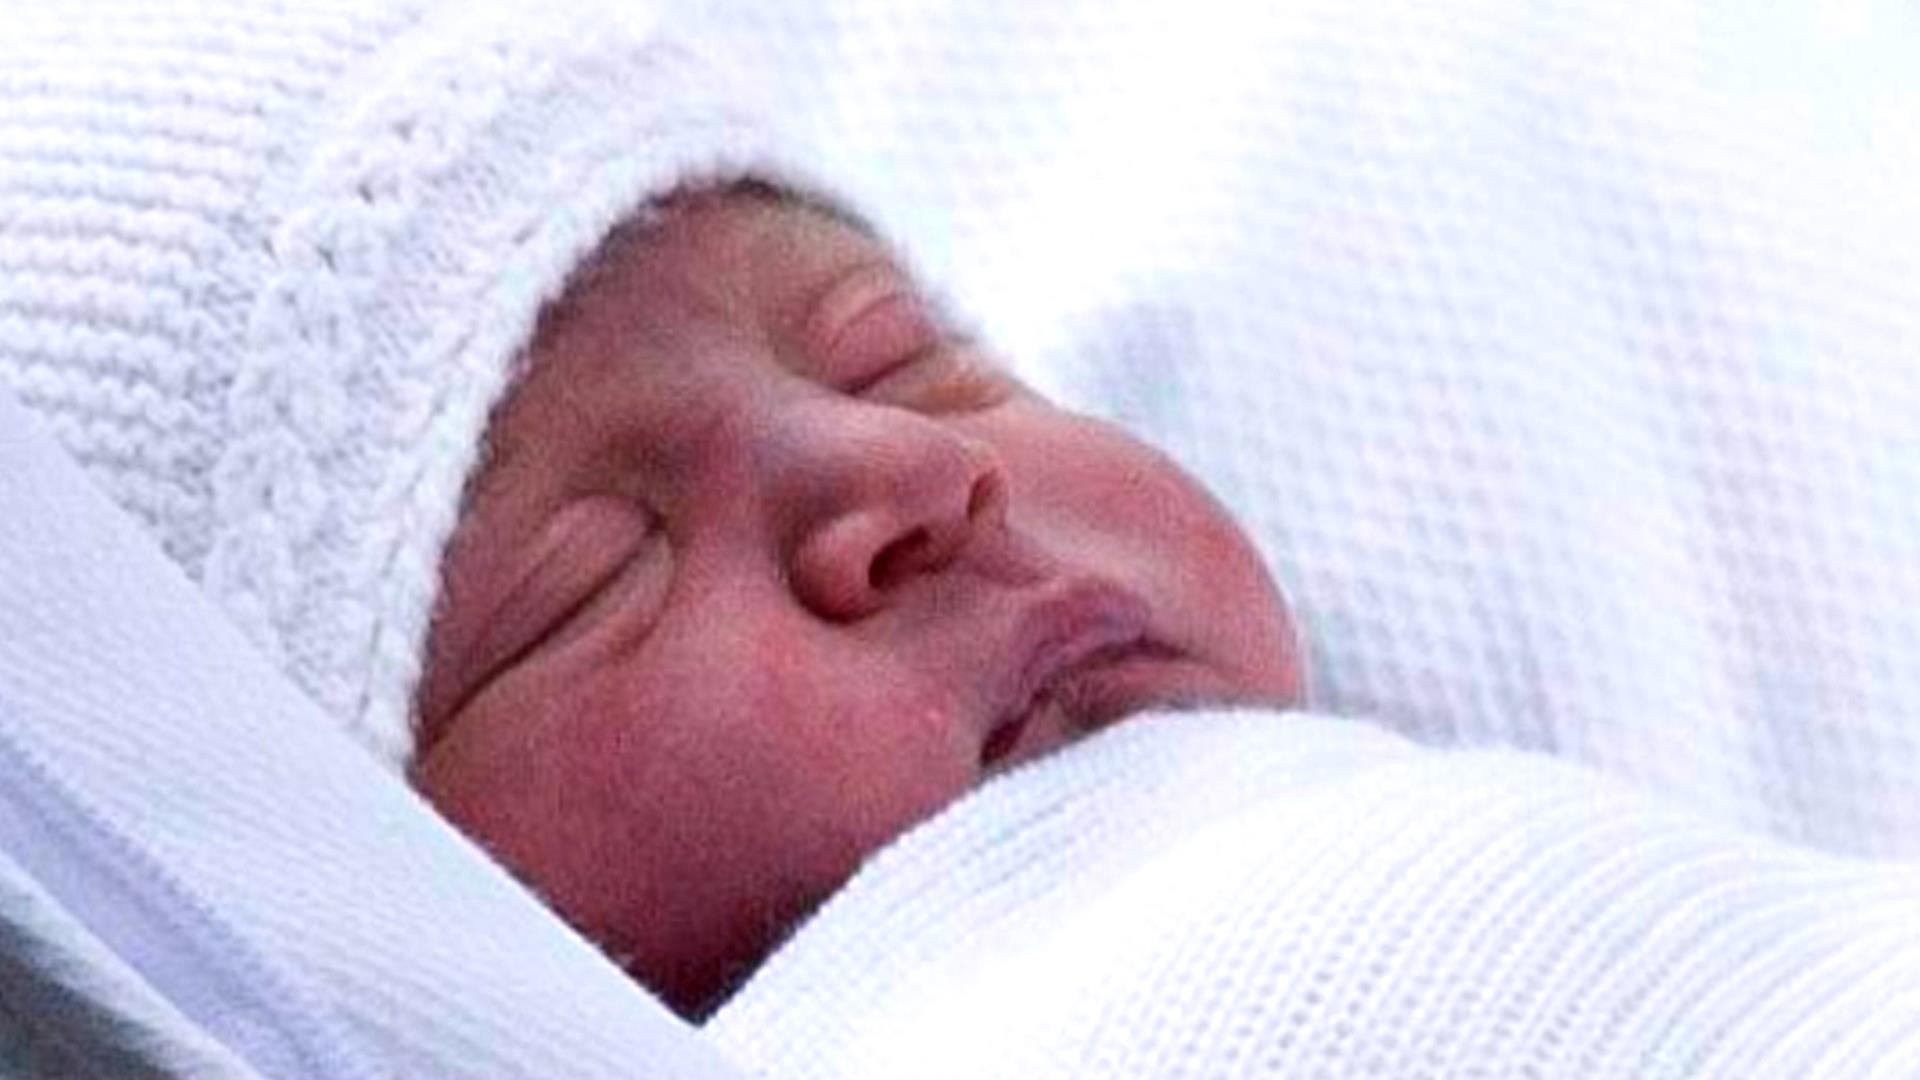 Louis Arthur Charles: Prince William and Duchess Kate name new royal baby